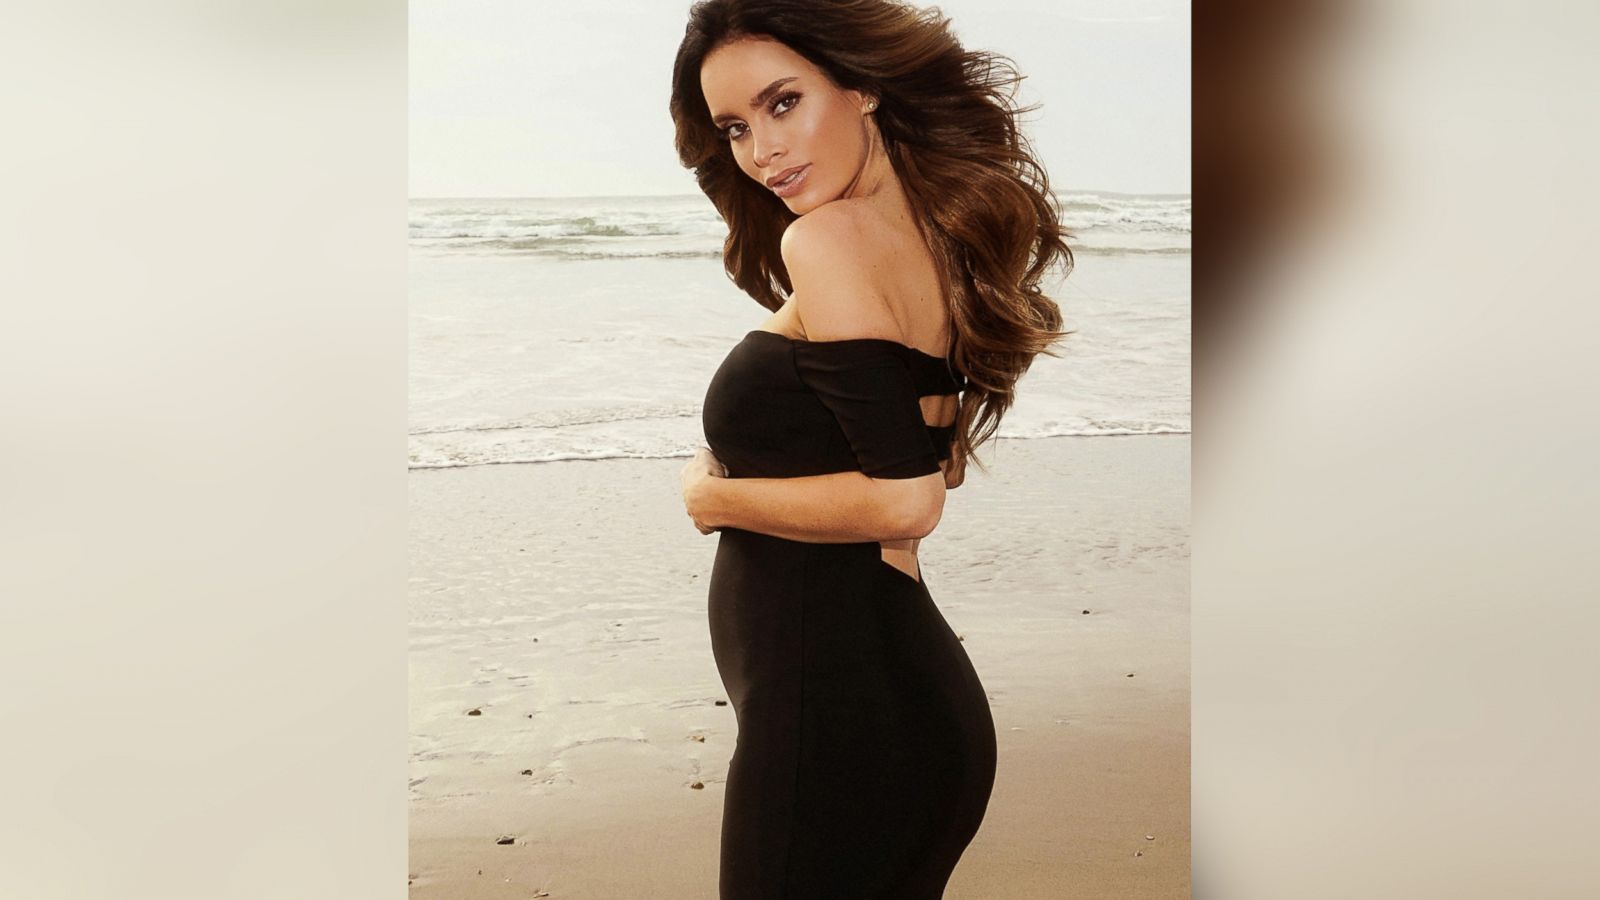 Pregnant Model Sarah Stage's Tiny Belly Causes Social Media Uproar